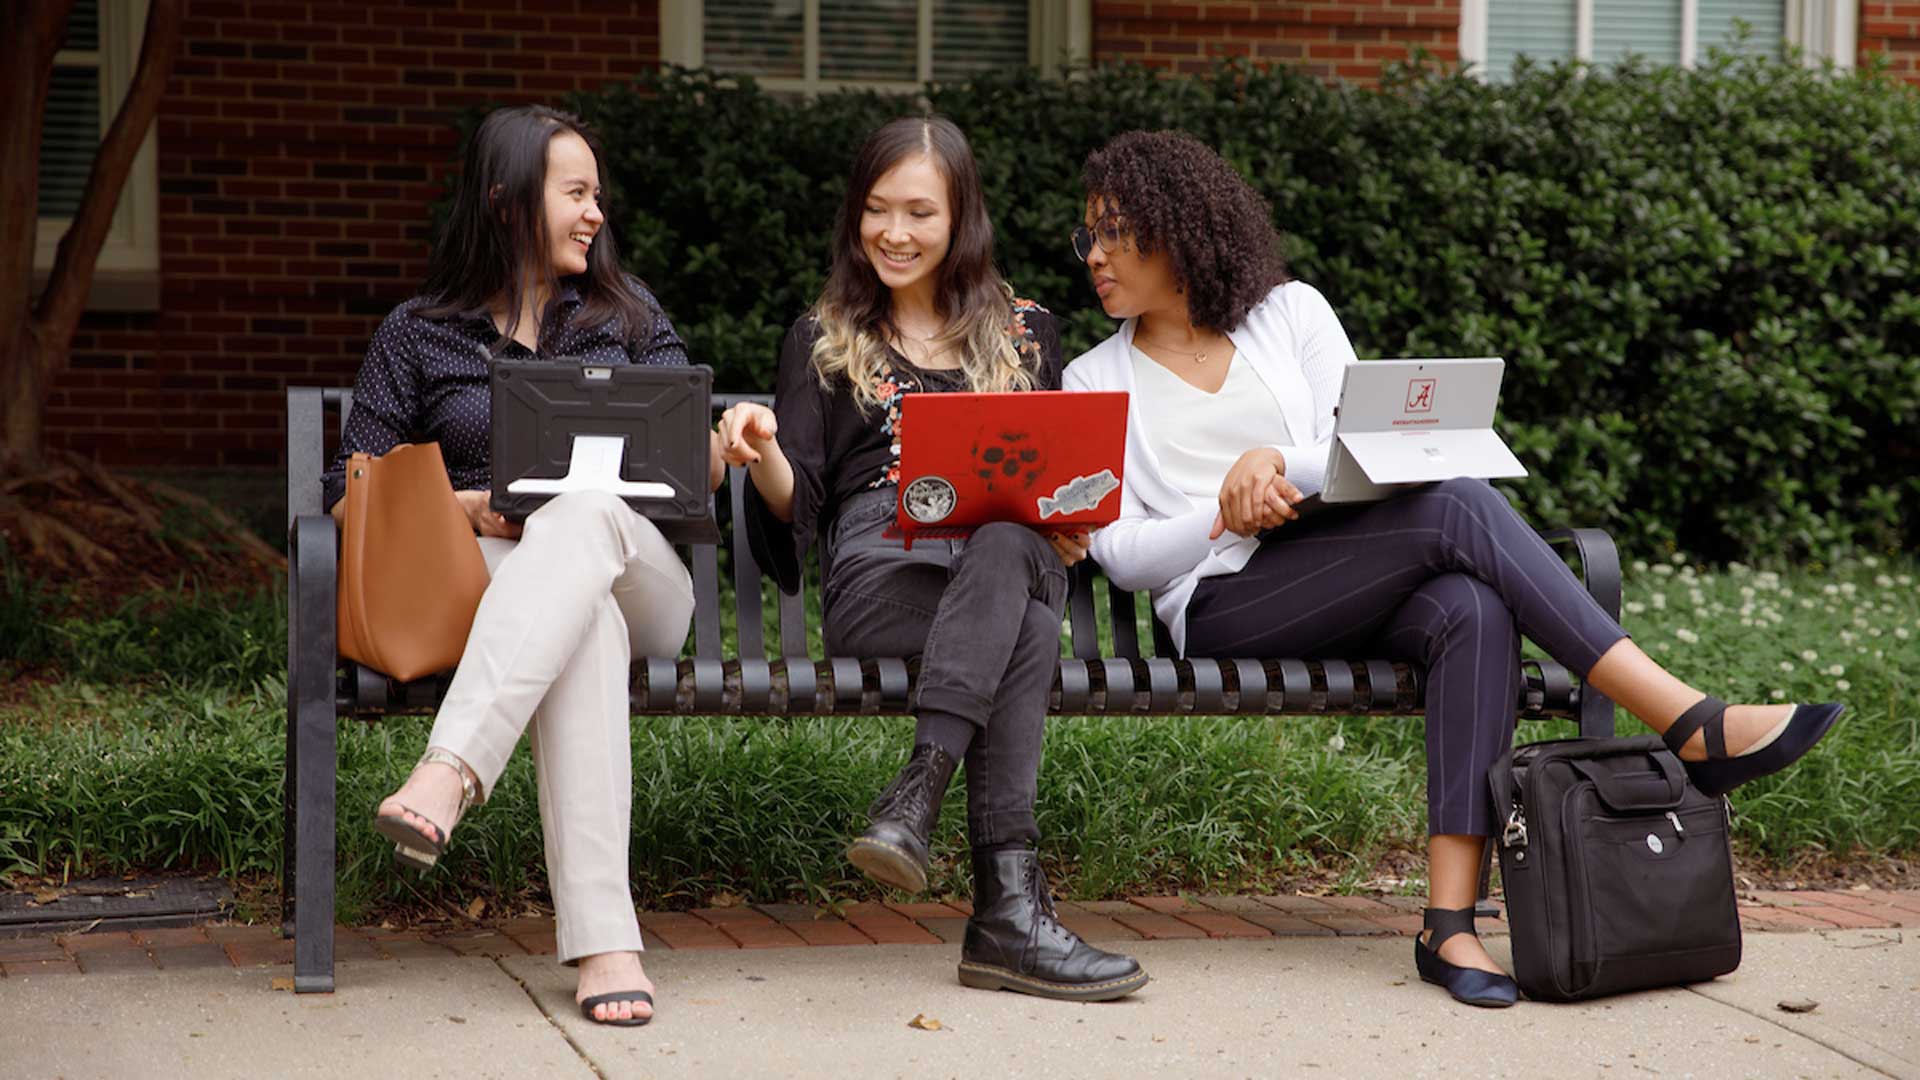 Three women sitting on a black bench outside are chatting. Each woman has a laptop.